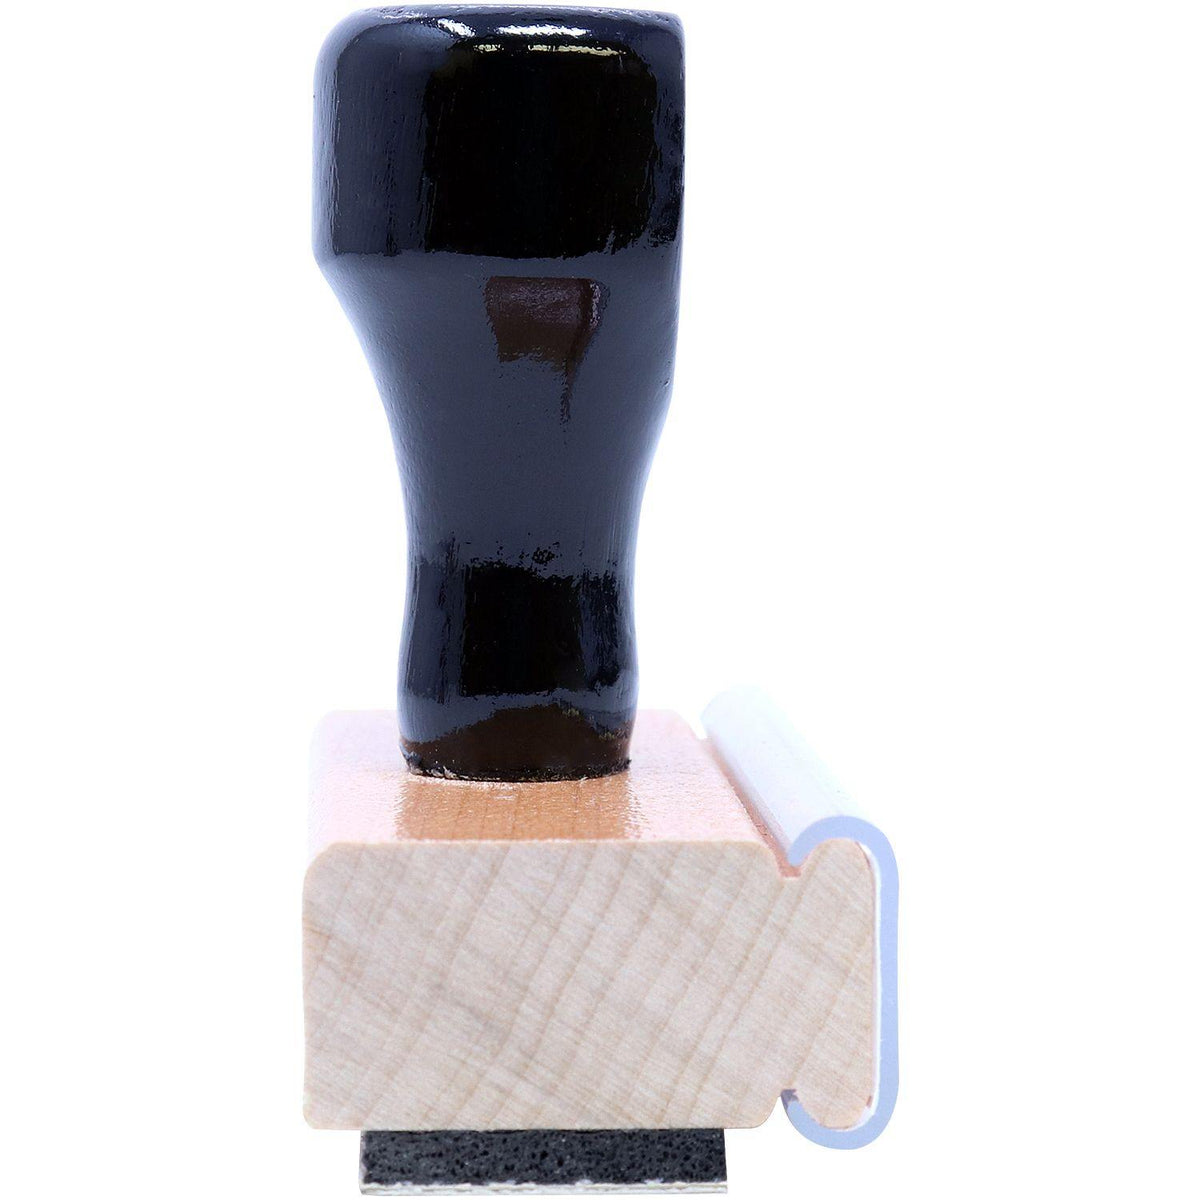 Priority Rubber Stamp - Engineer Seal Stamps - Brand_Acorn, Impression Size_Small, Stamp Type_Regular Stamp, Type of Use_Office, Type of Use_Postal &amp; Mailing, Type of Use_Shipping &amp; Receiving